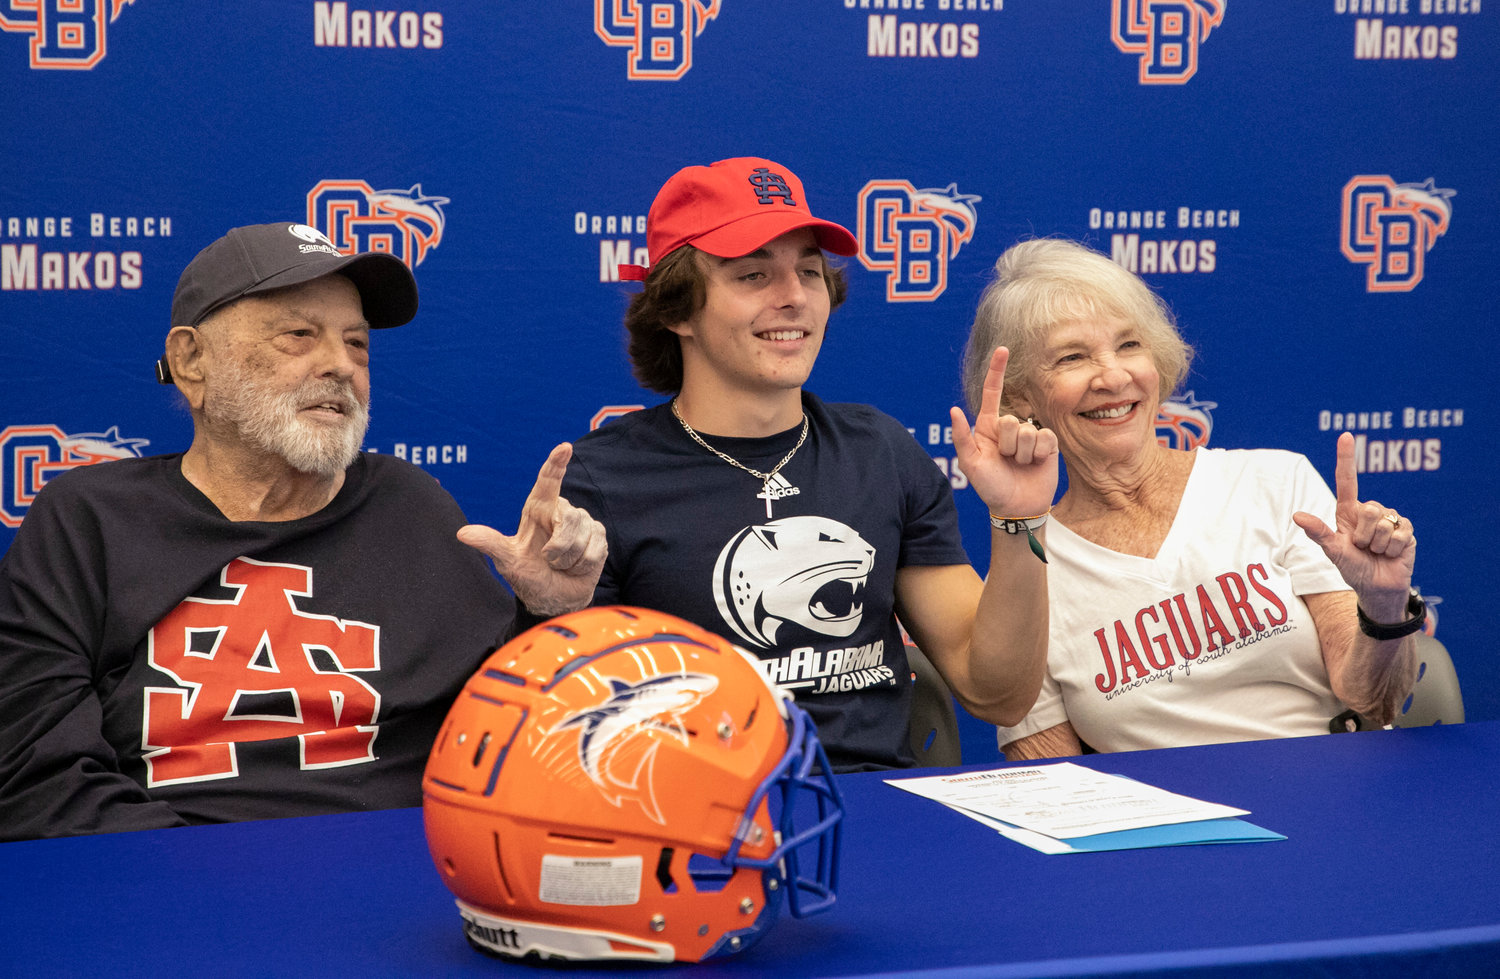 Orange Beach’s Cash Turner holds up the South Alabama “J” with his grandparents during the Feb. 1 National Signing Day ceremony at the high school where Turner signed with the Jaguars as a preferred walk-on.